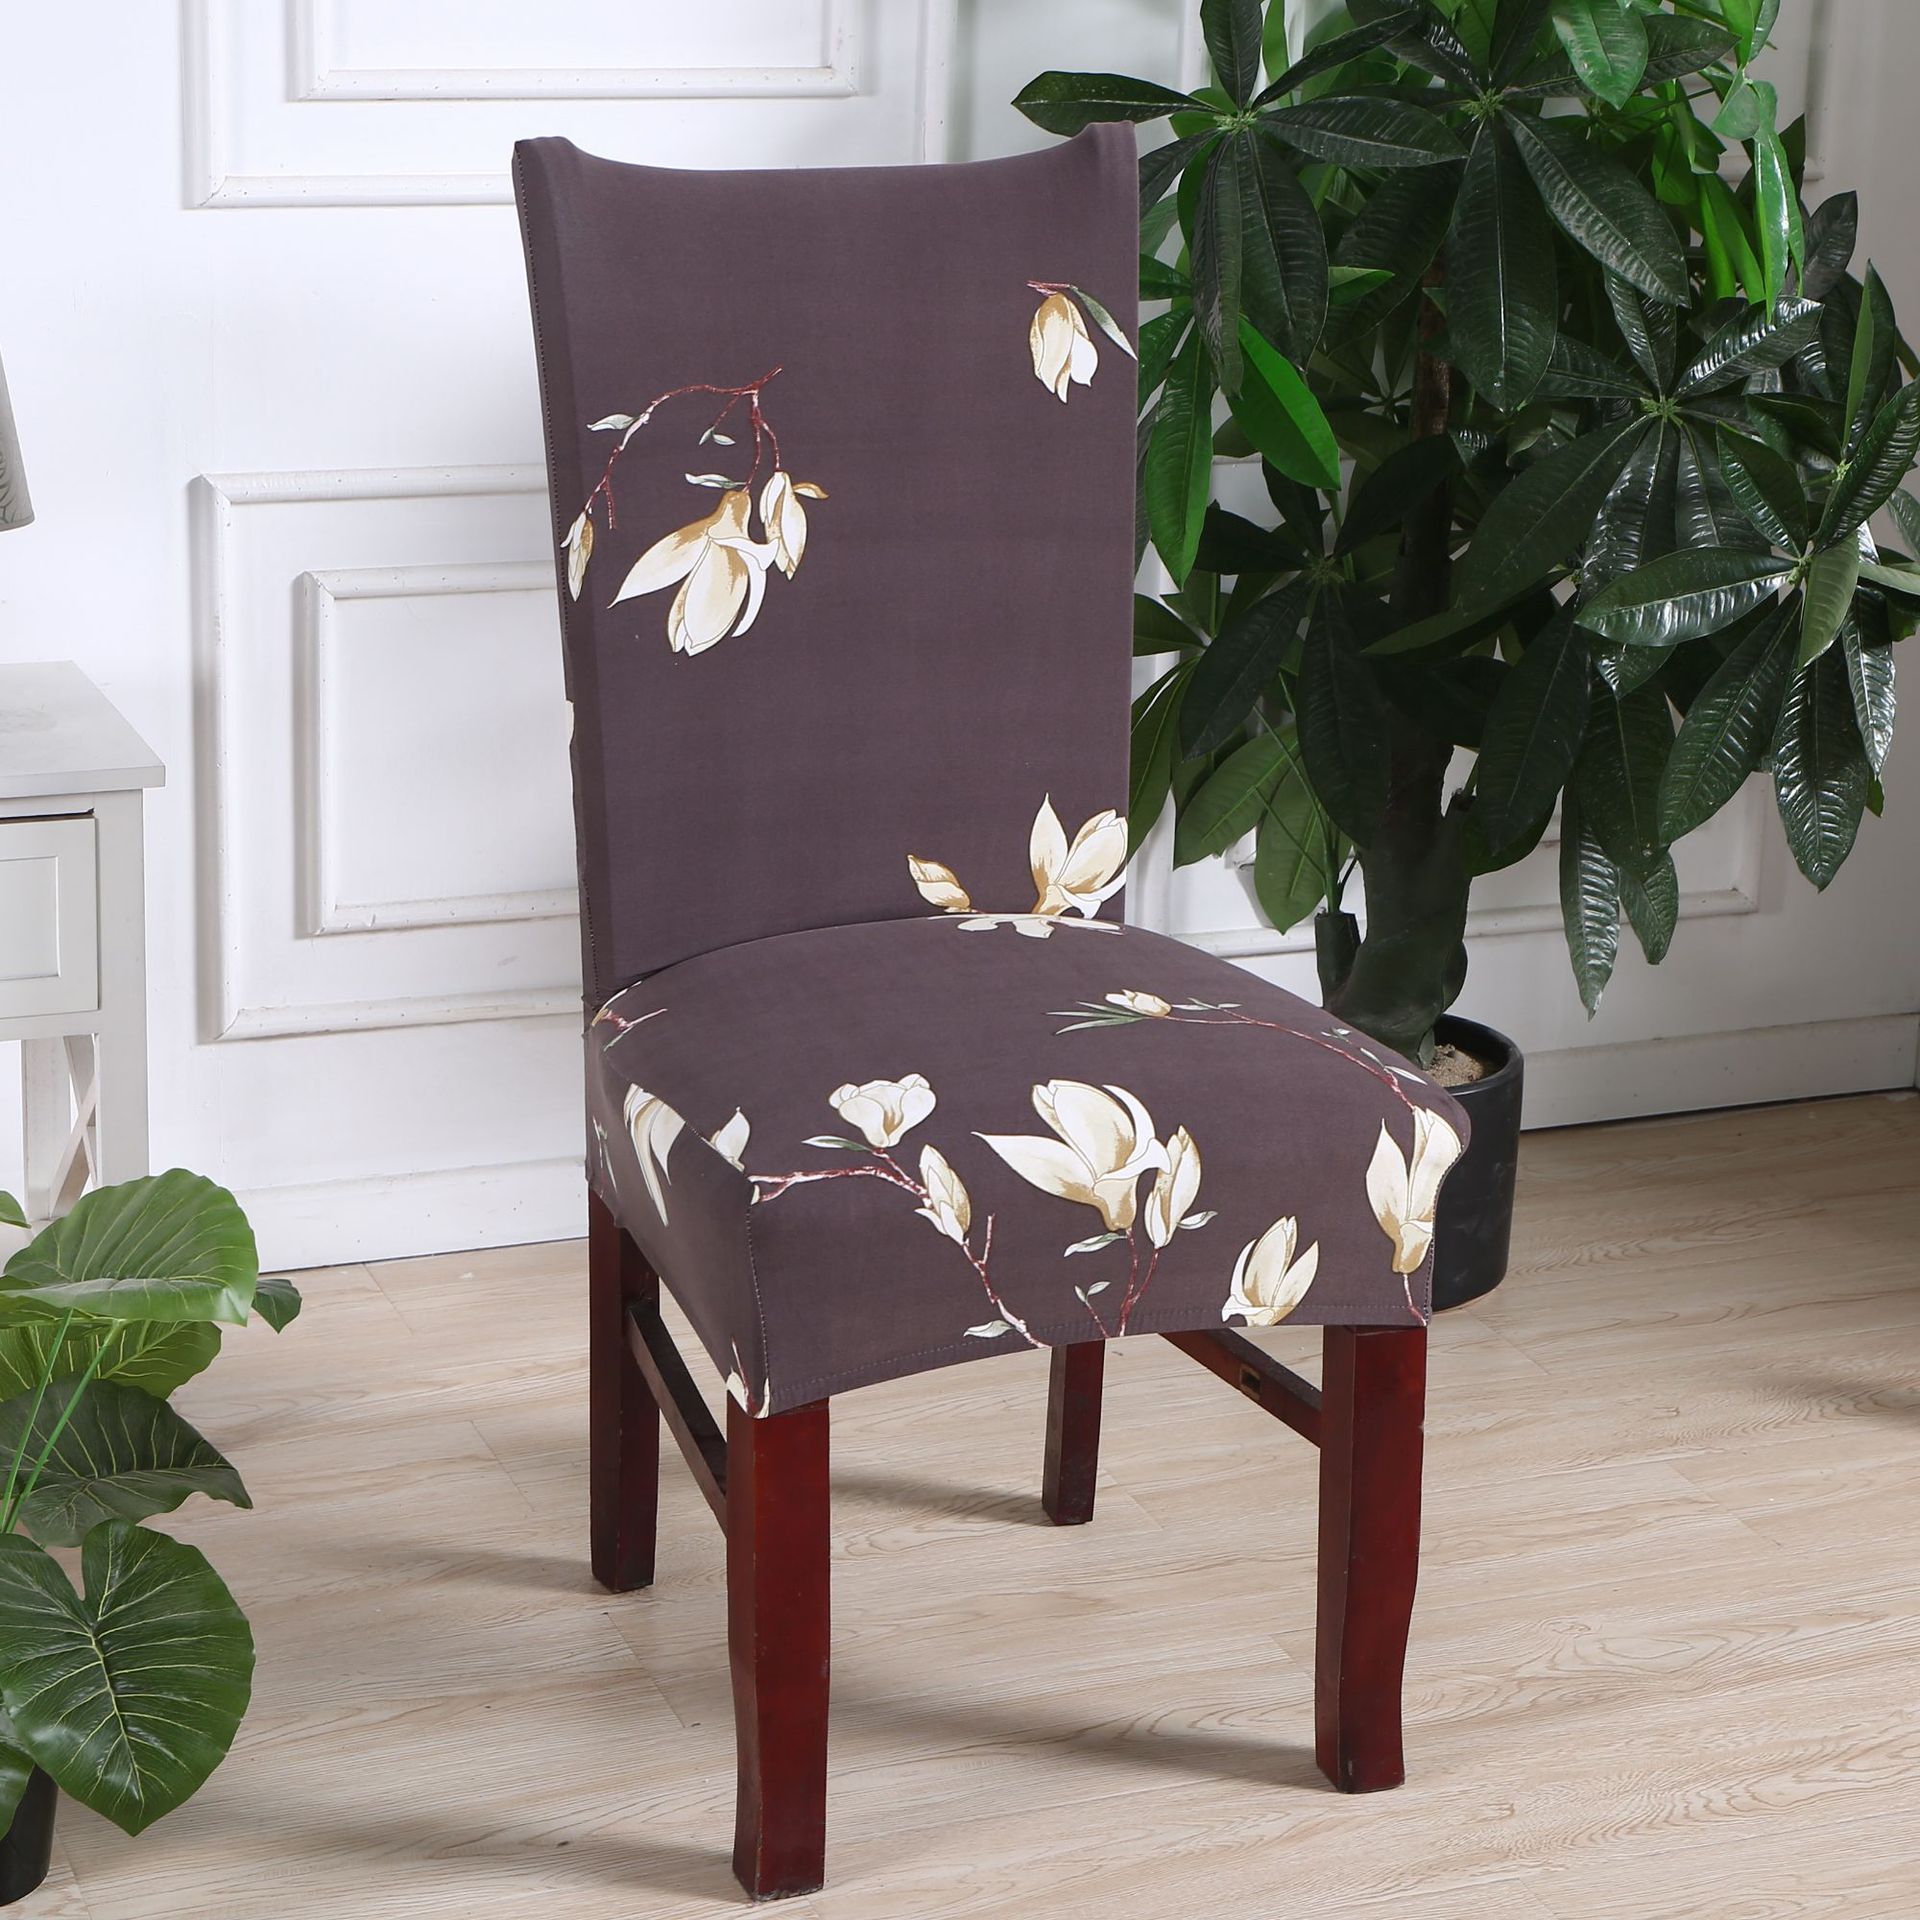 Stretch Dining Chair Covers Slipcover Universal Removable Protective Cover GIFT 